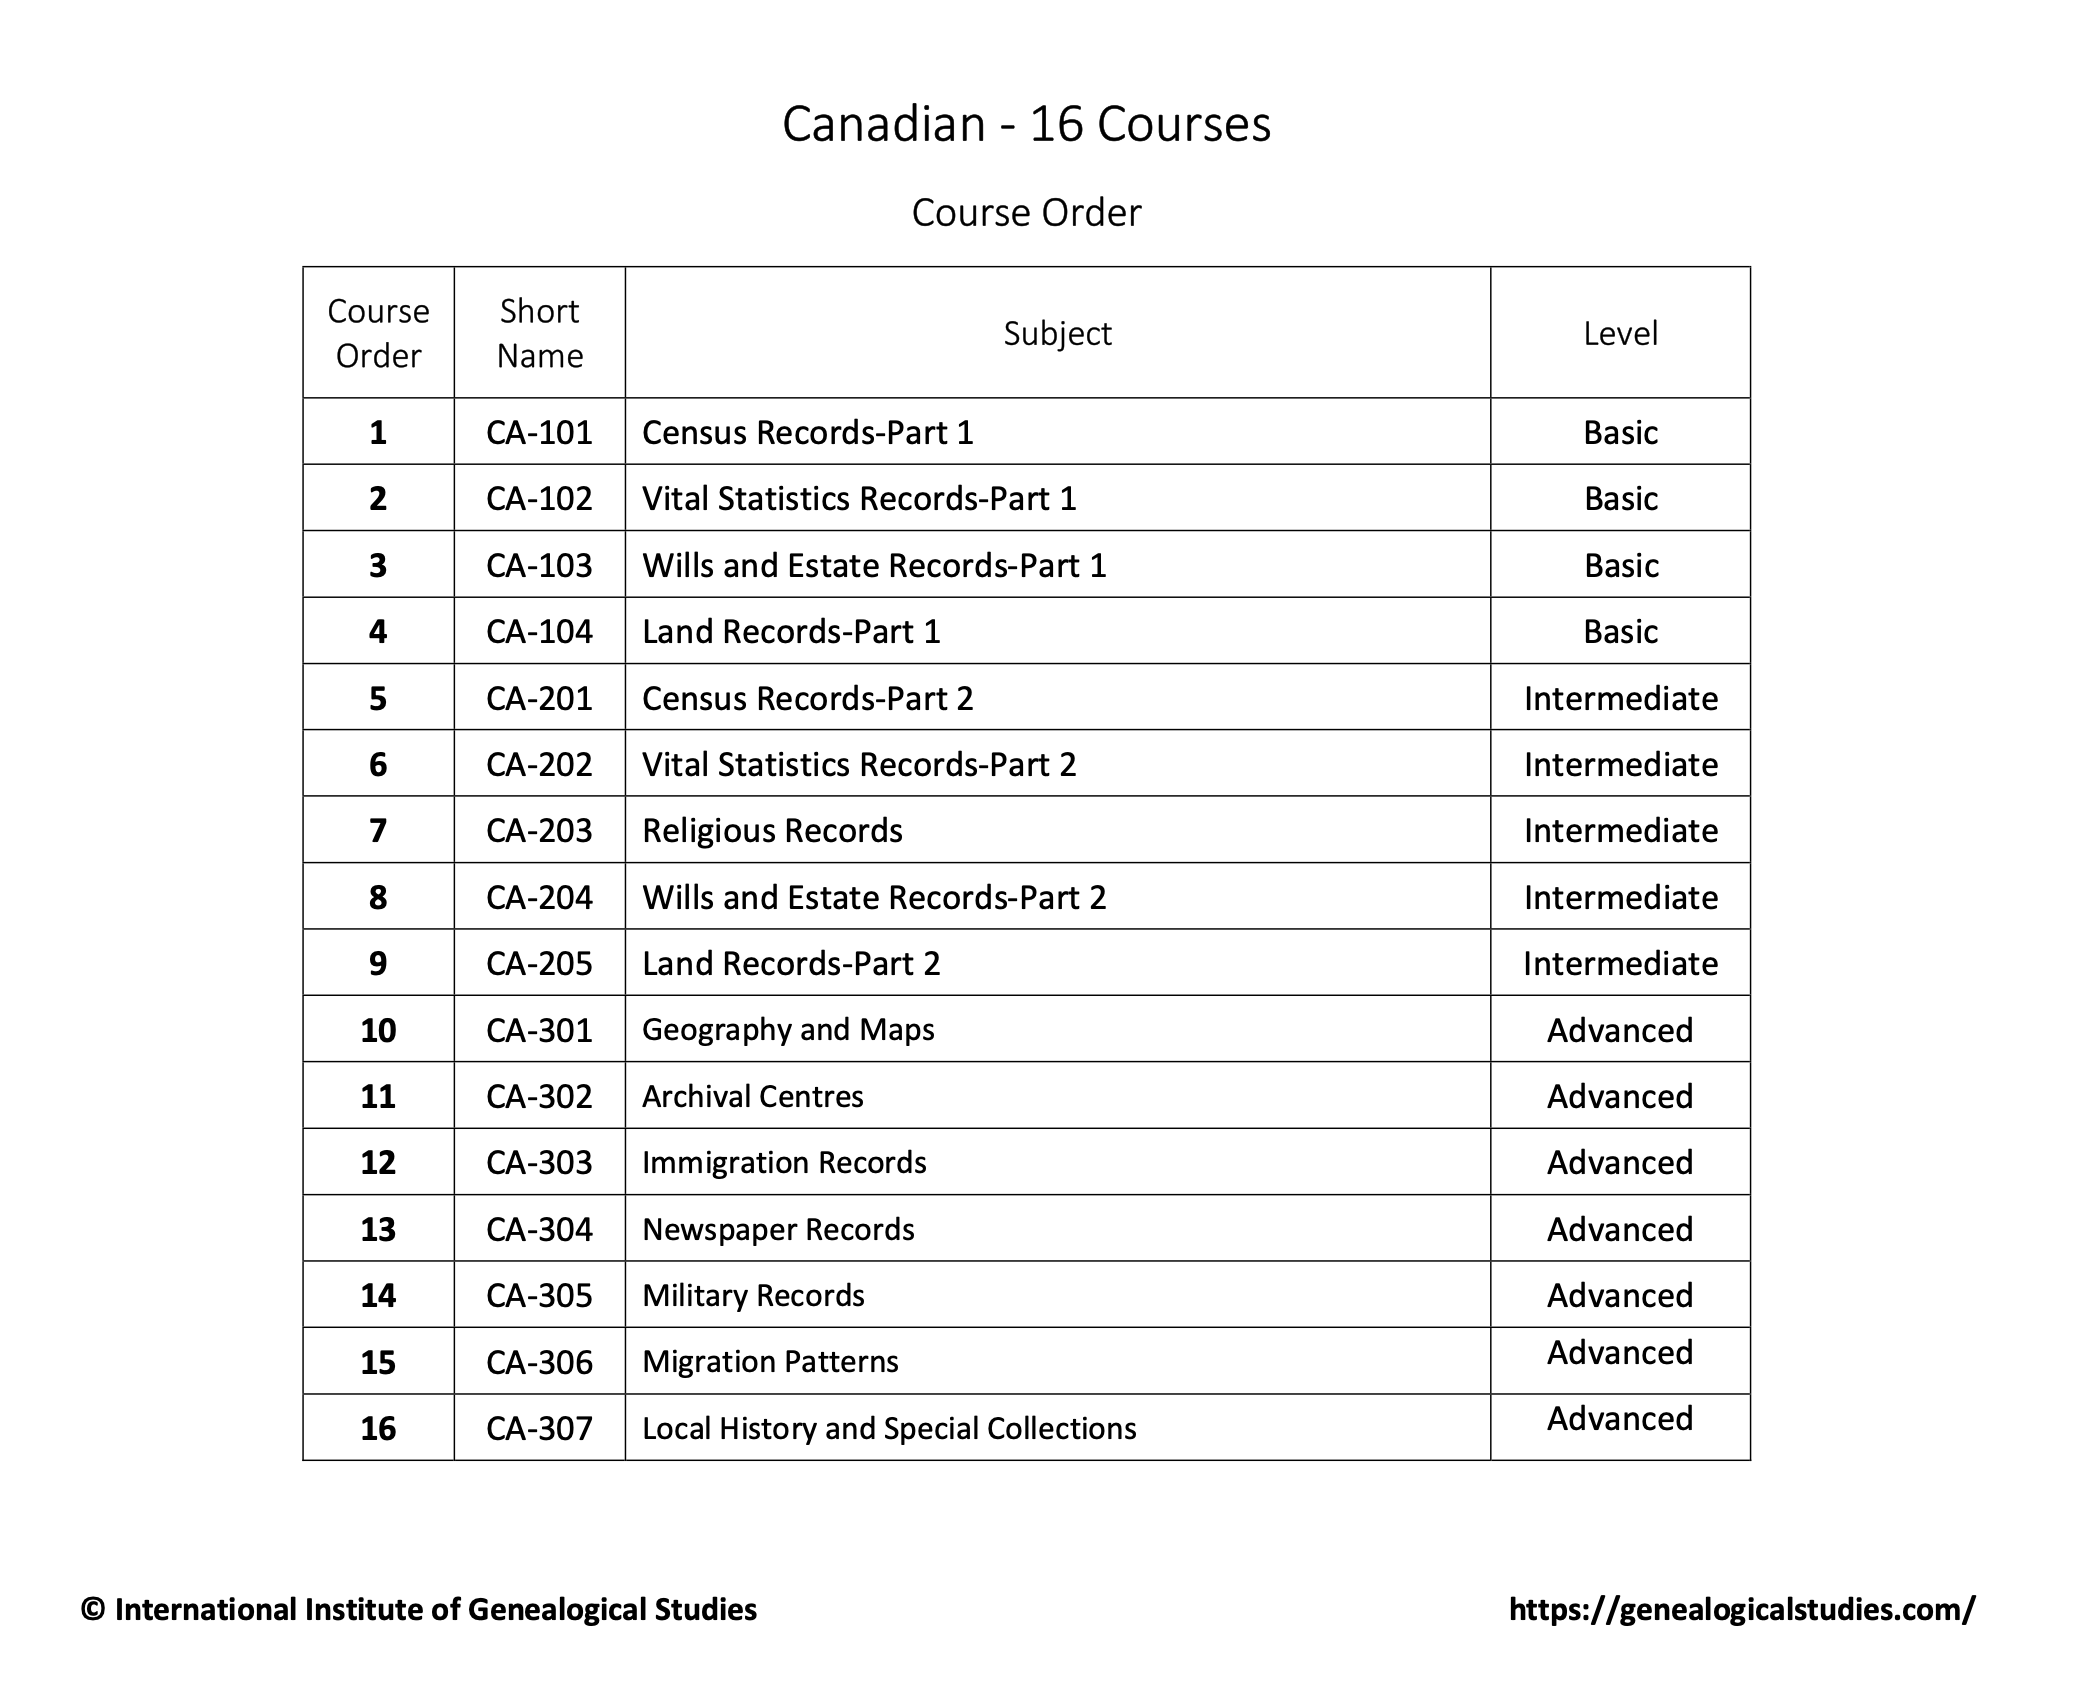 Canadian course order